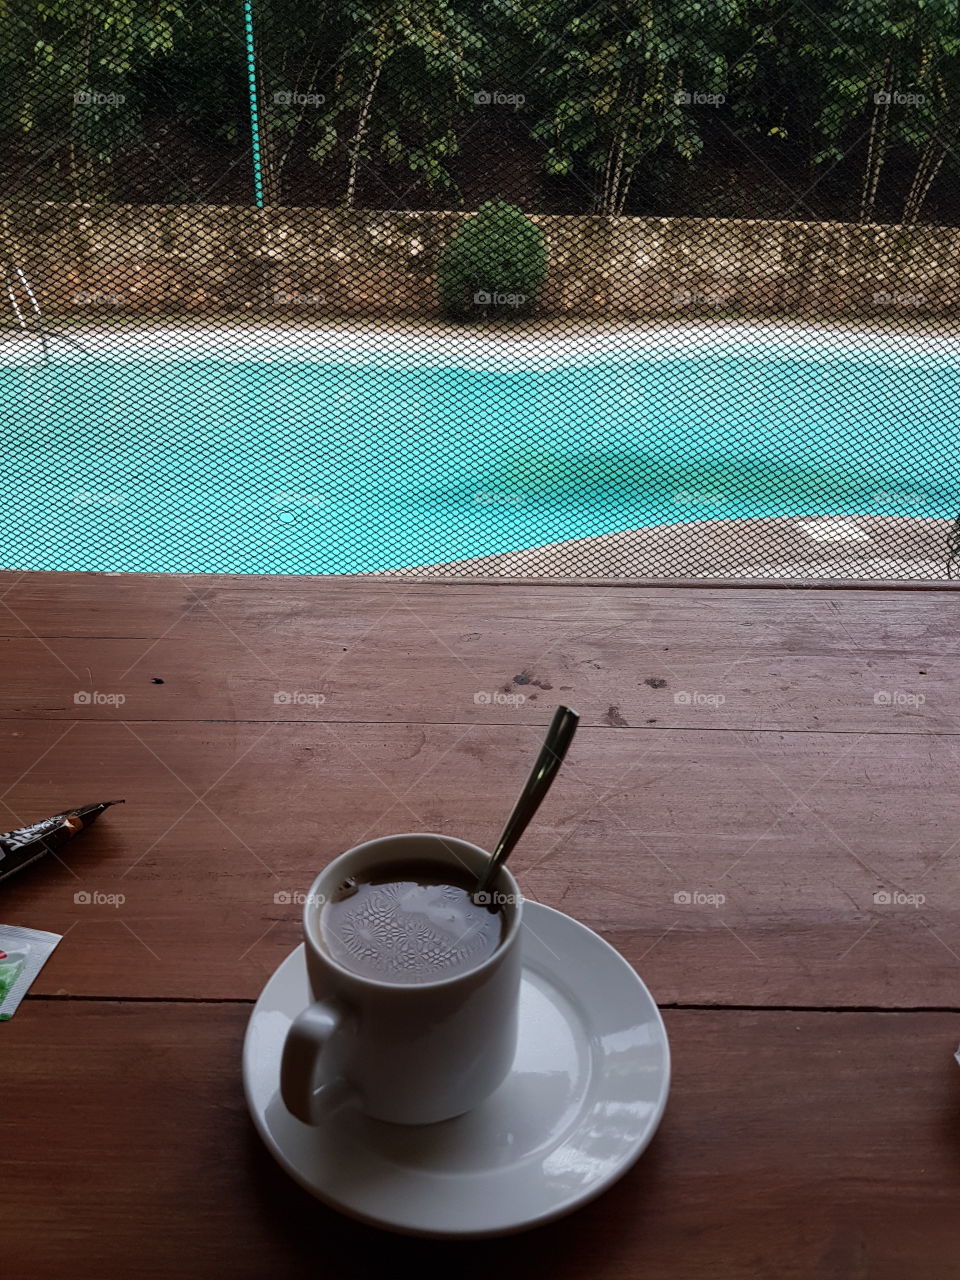 Do I drink coffee first or do I dip in the pool first? Waking